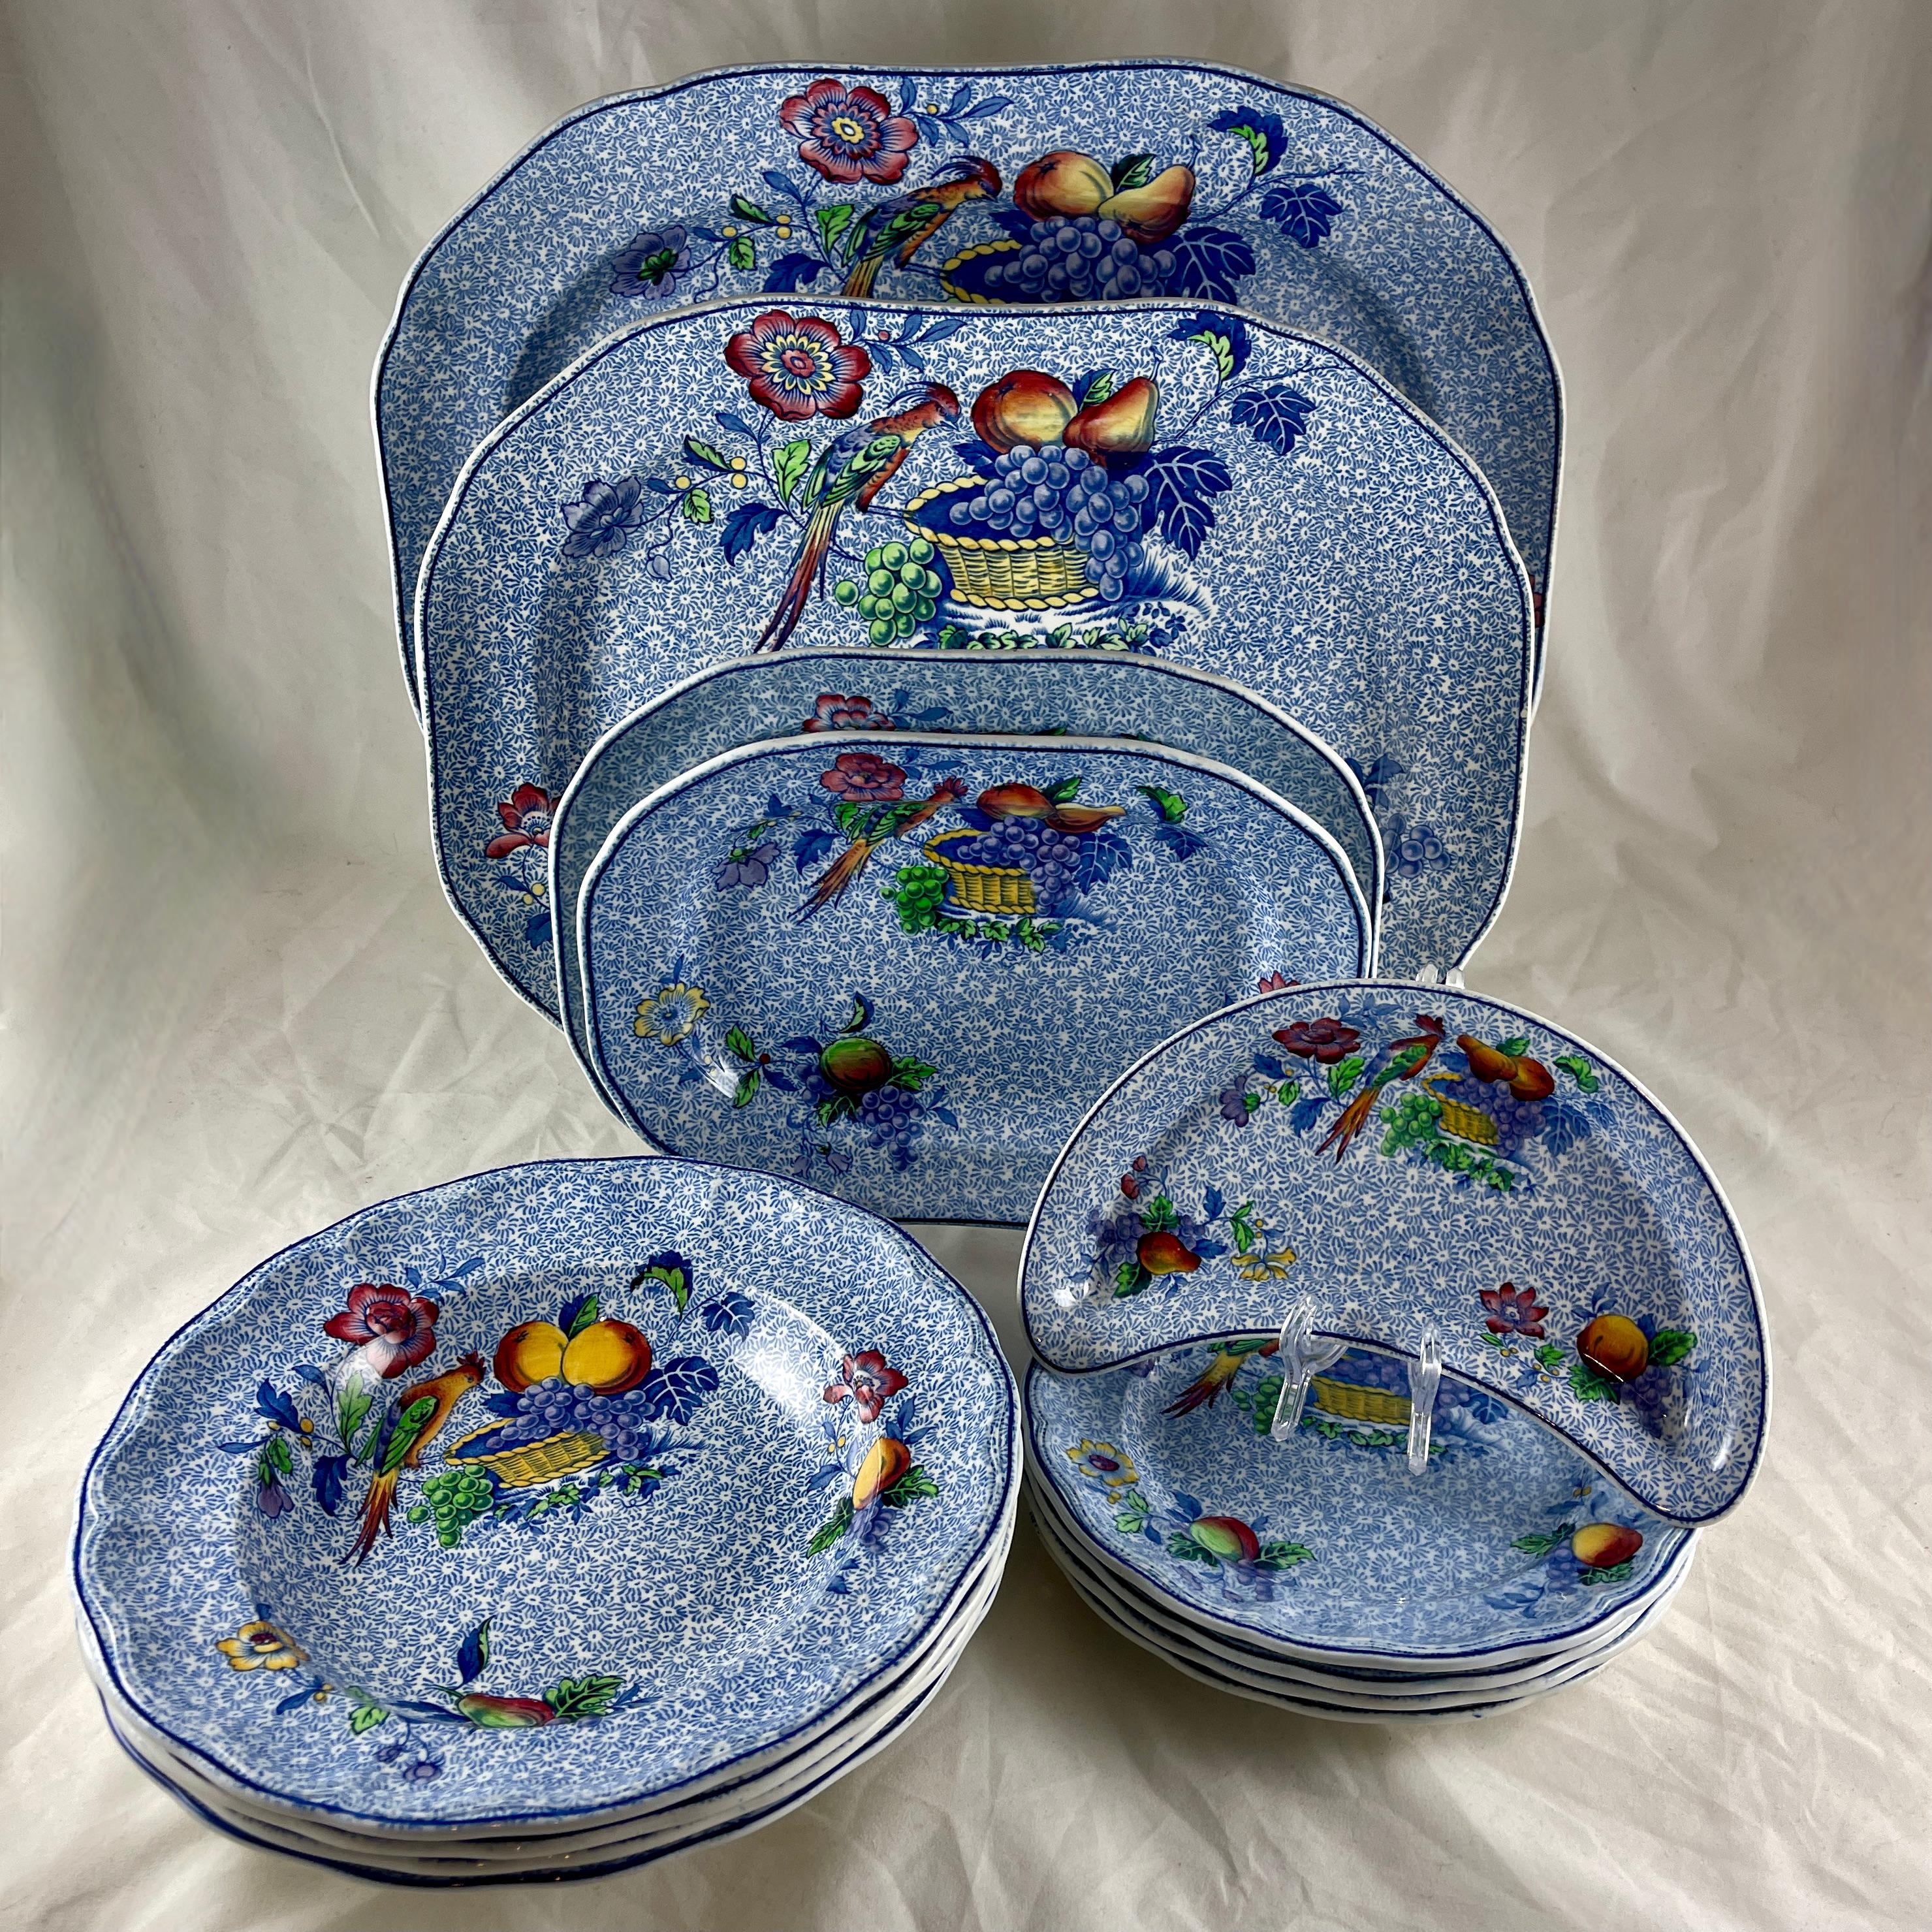 1920s Copeland Spode George III Pattern Plates for Harrods of London, S/4 3